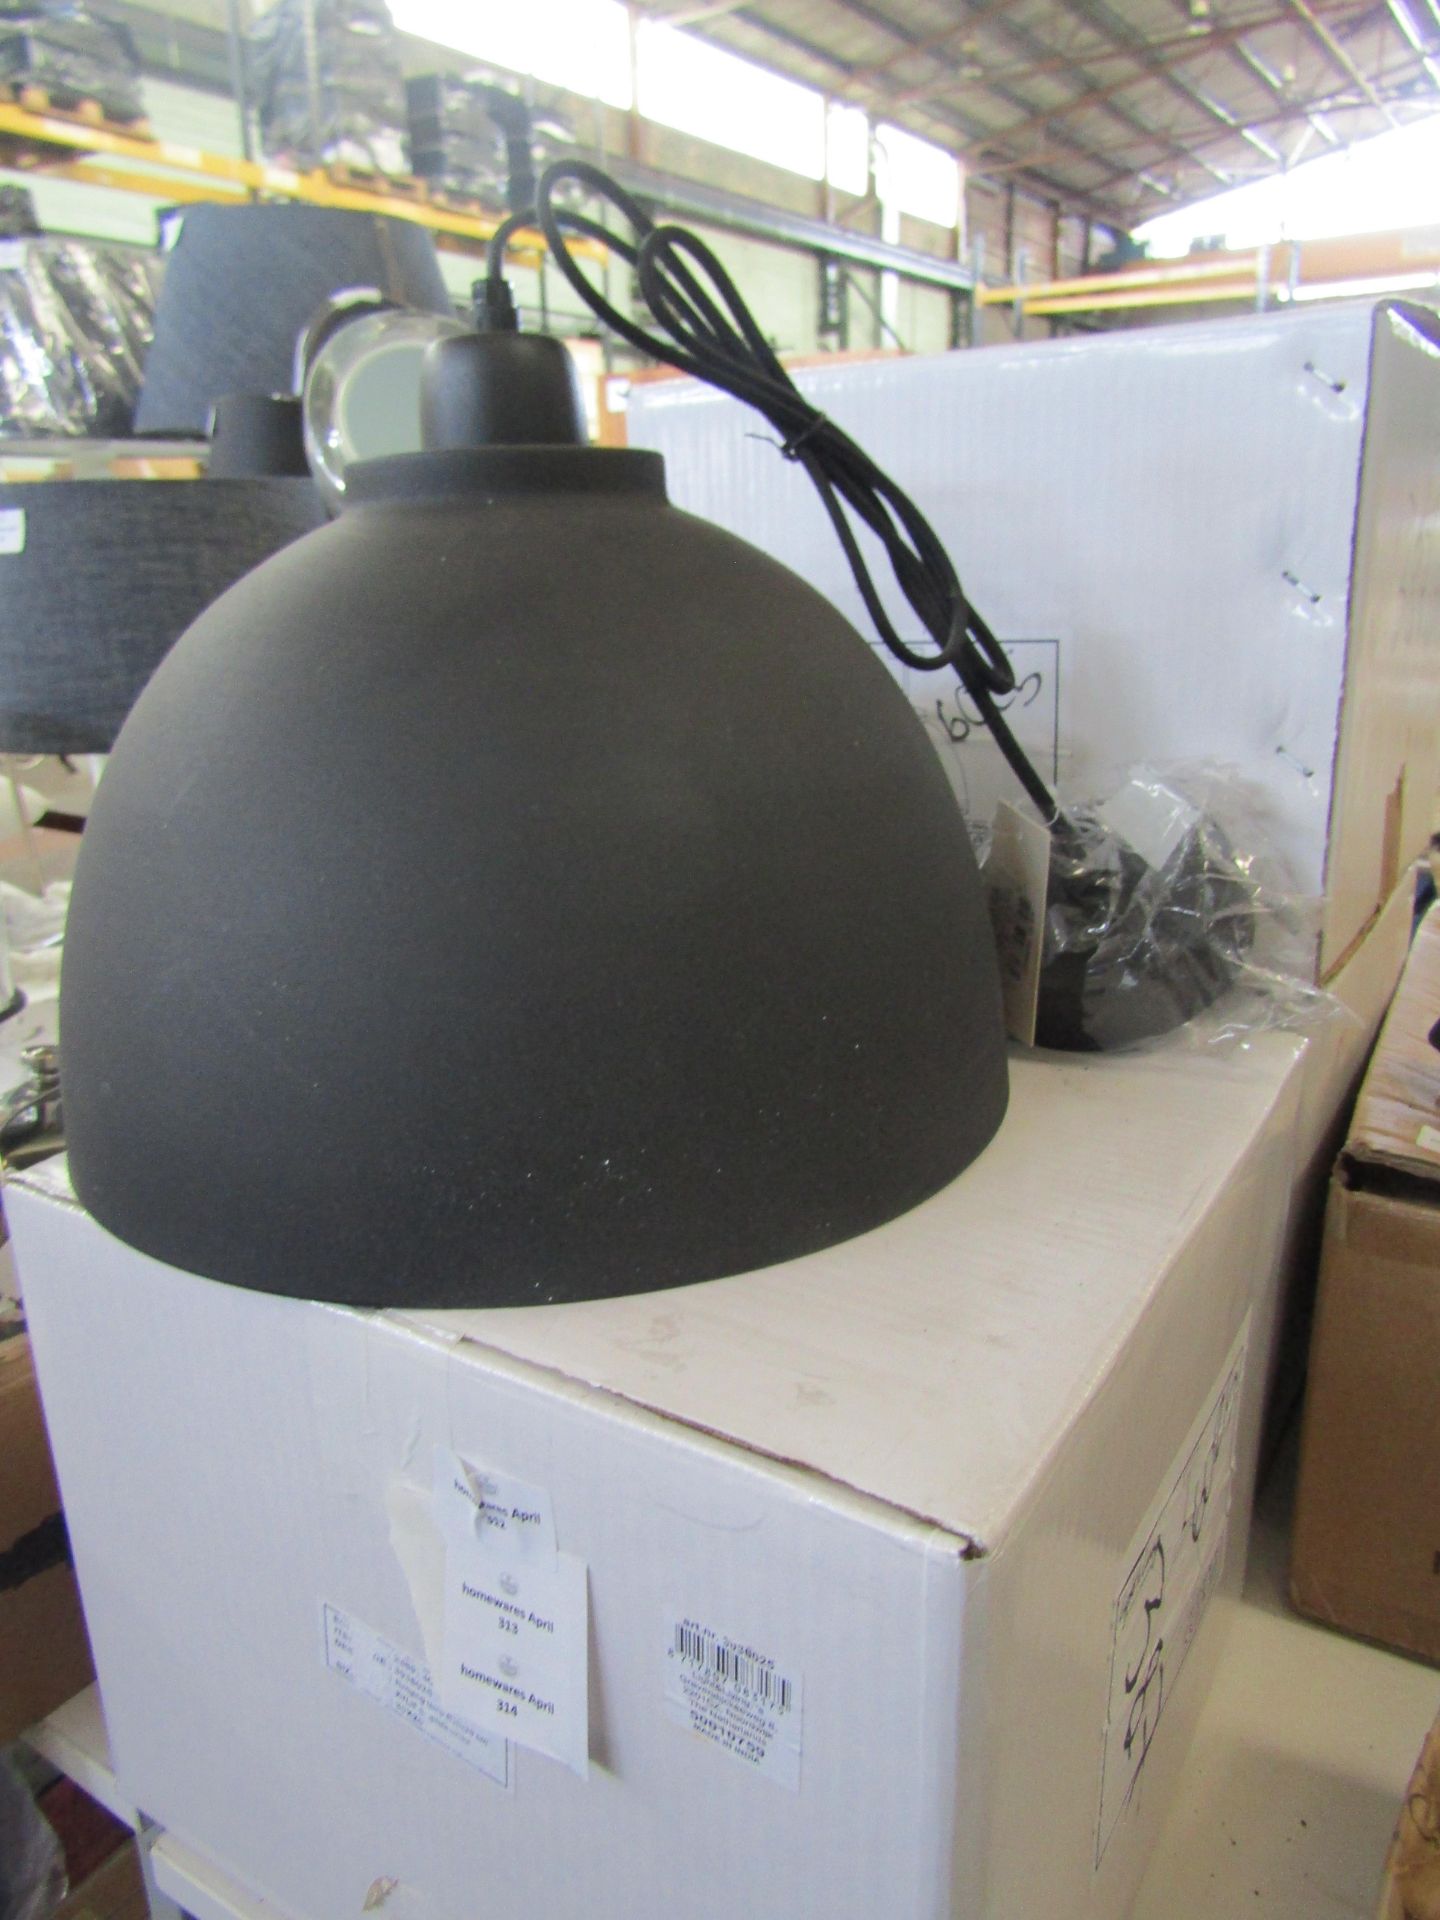 Black & White Hanging Lamp In Kylie Graphite - White. Size: D30 x H26cm - RRP ?85.00 - New &